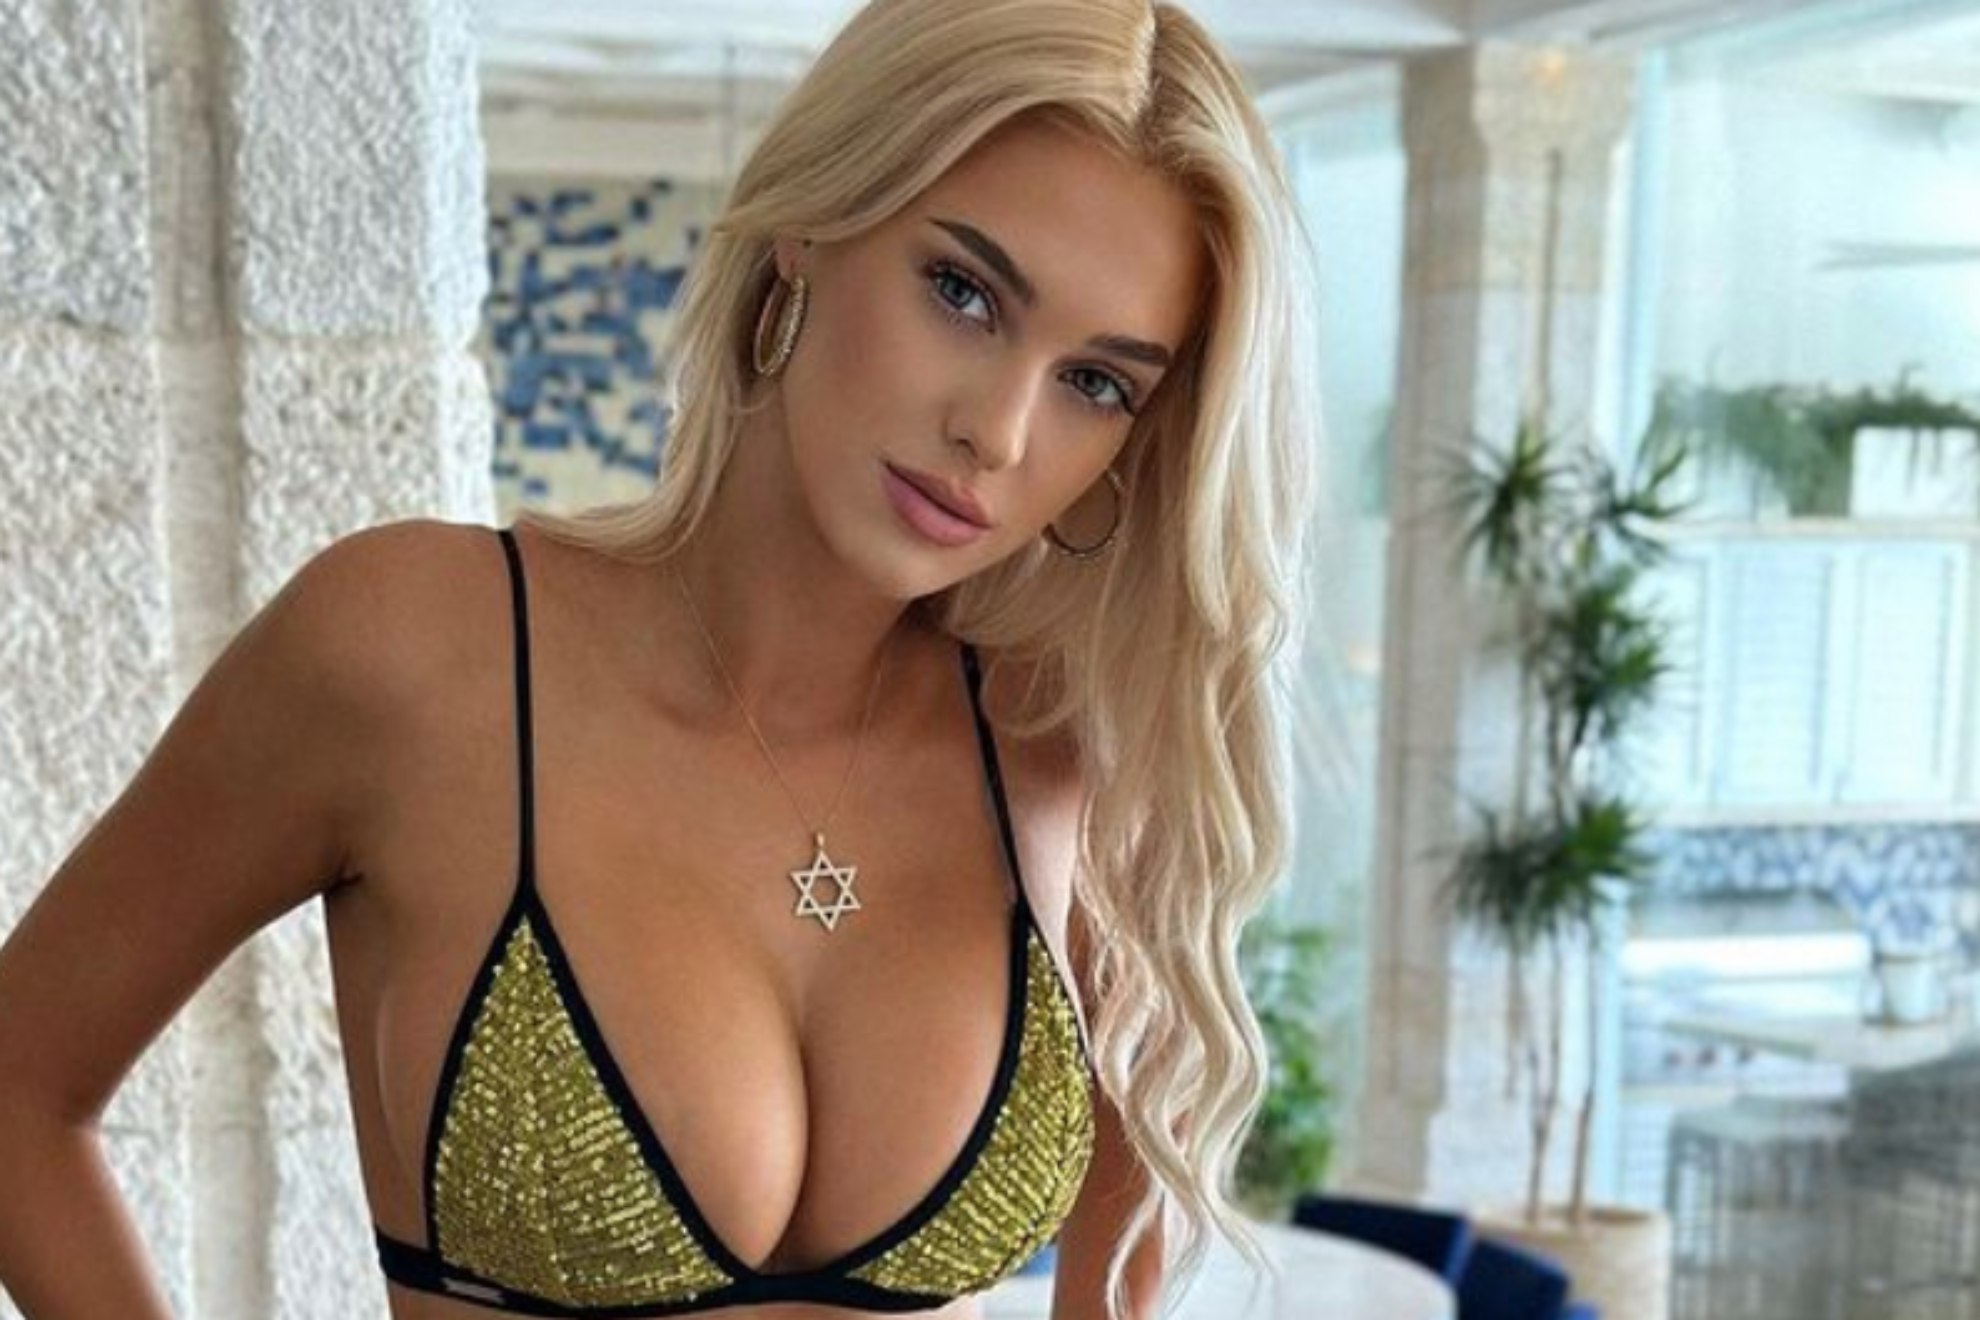 Veronika Rajek poses in tight bikini and responds to haters: Everything about me is natural